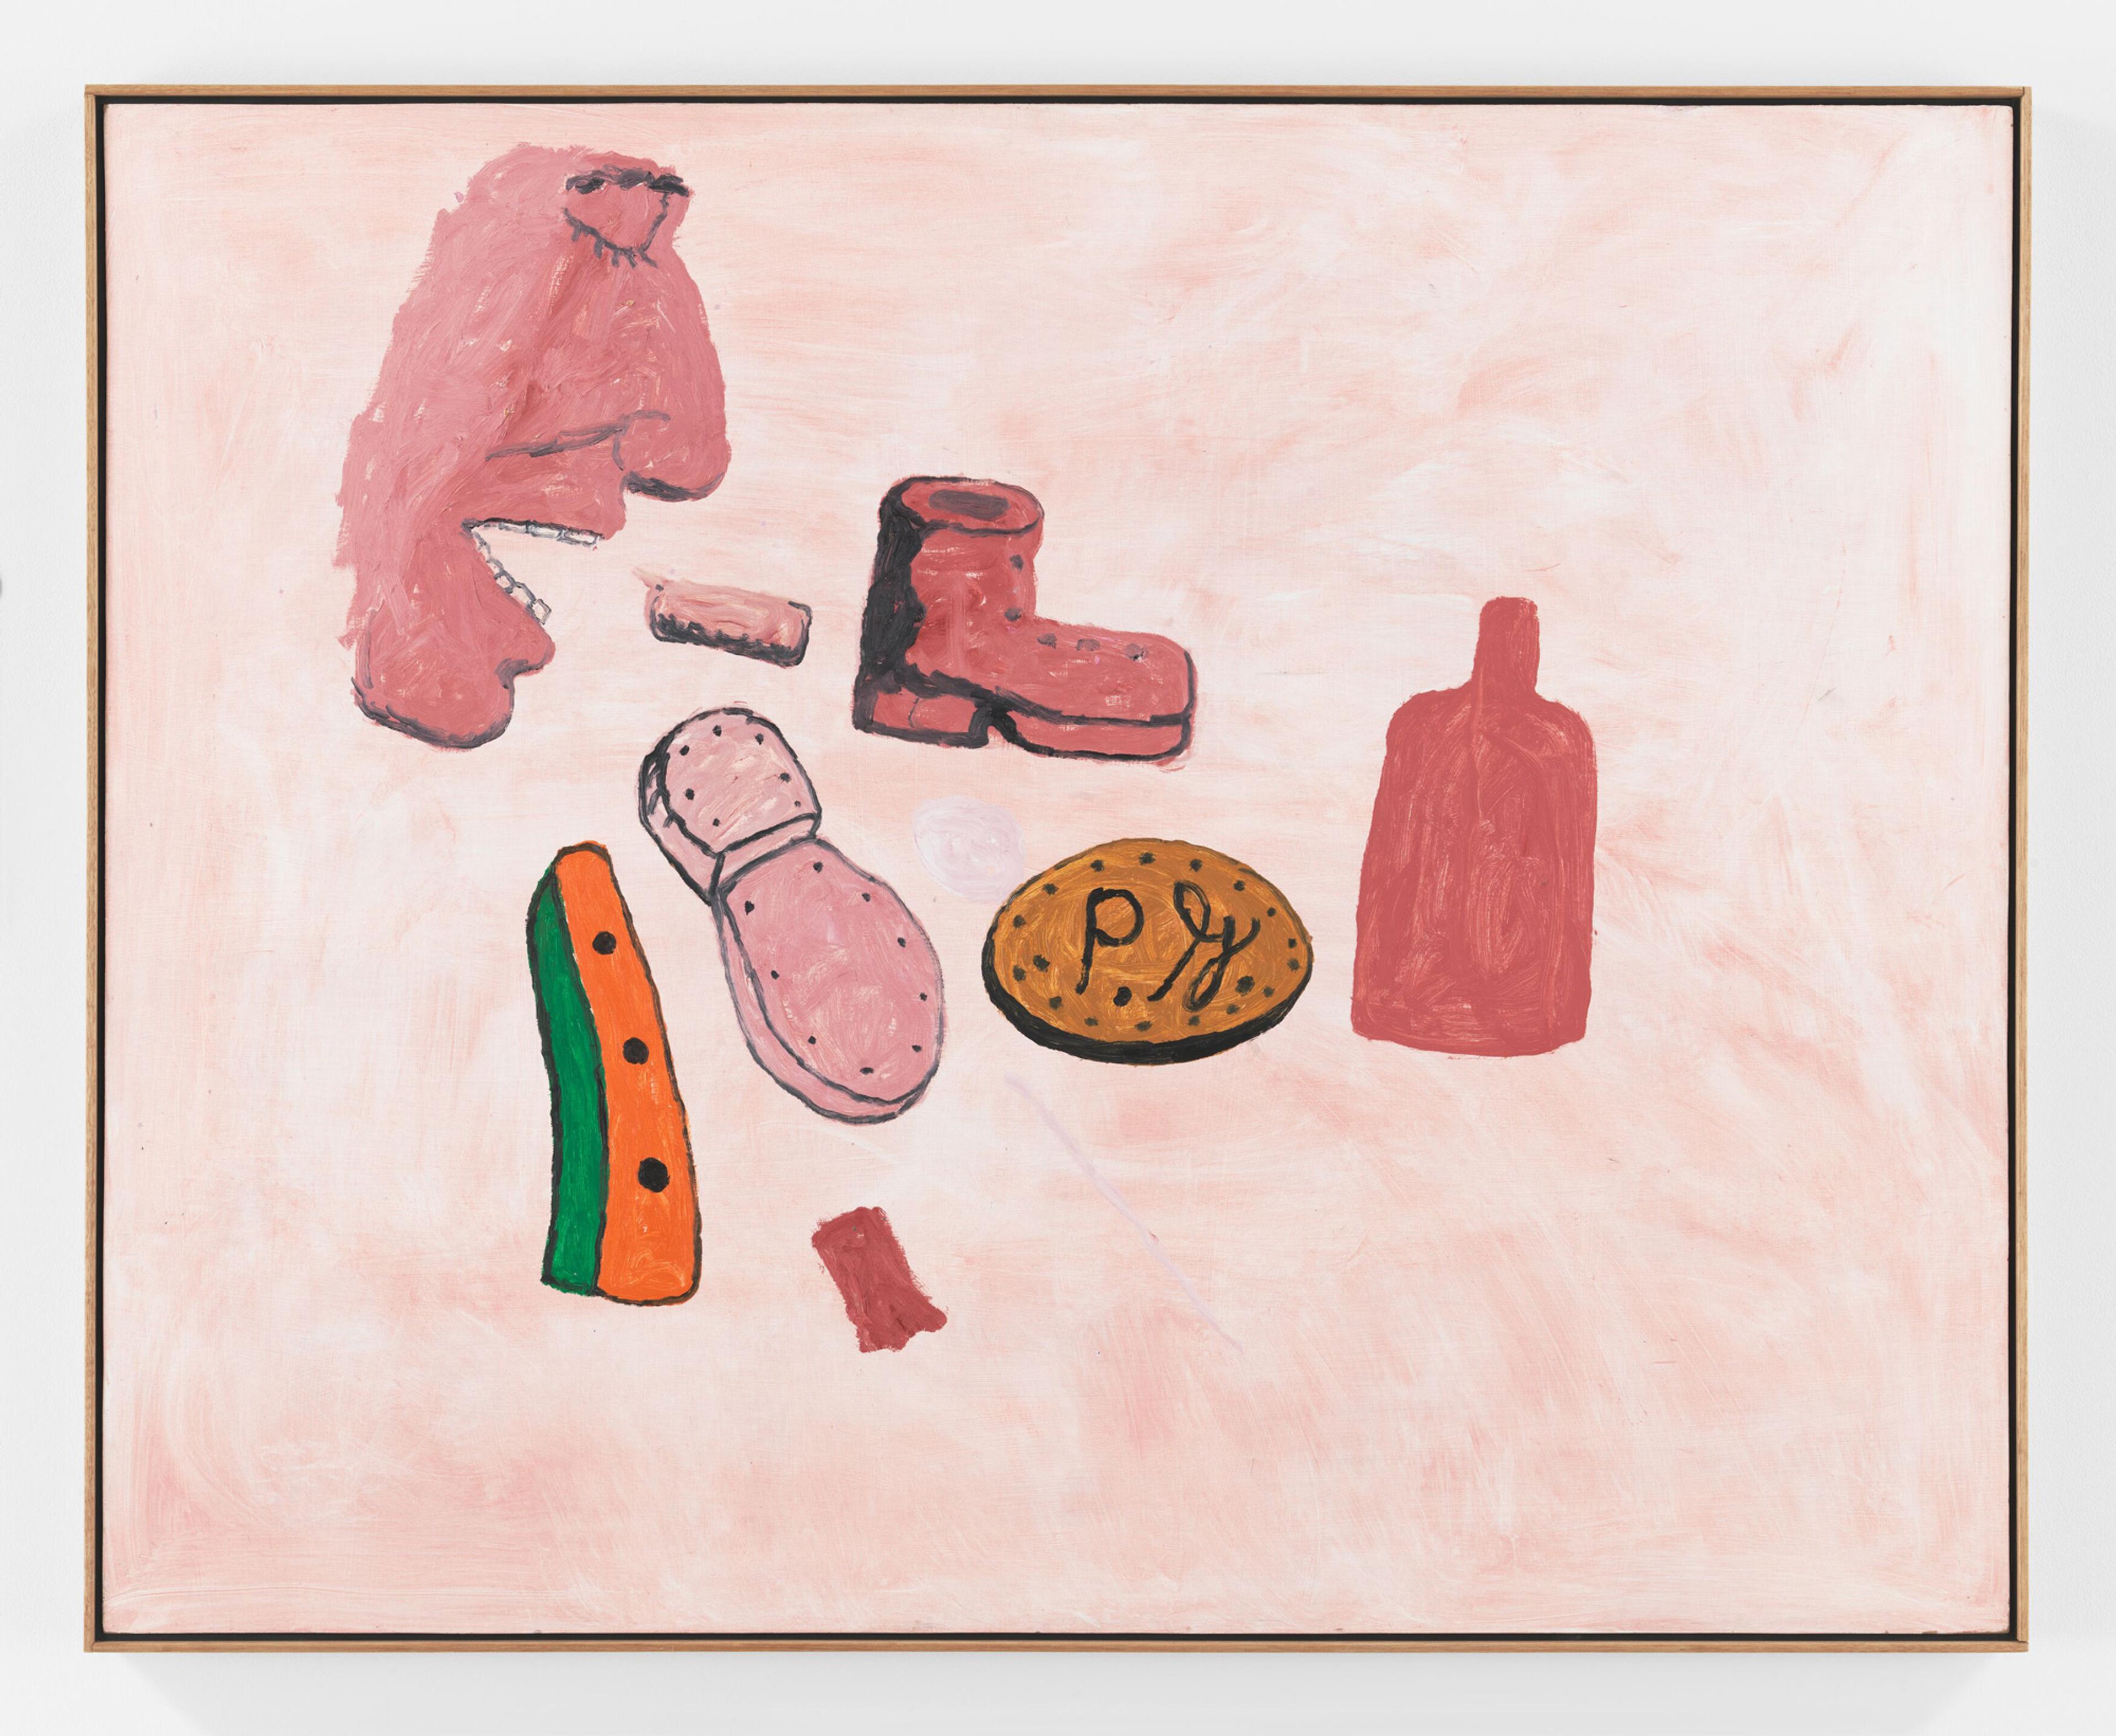 Philip Guston, Painter’s Forms, 1972